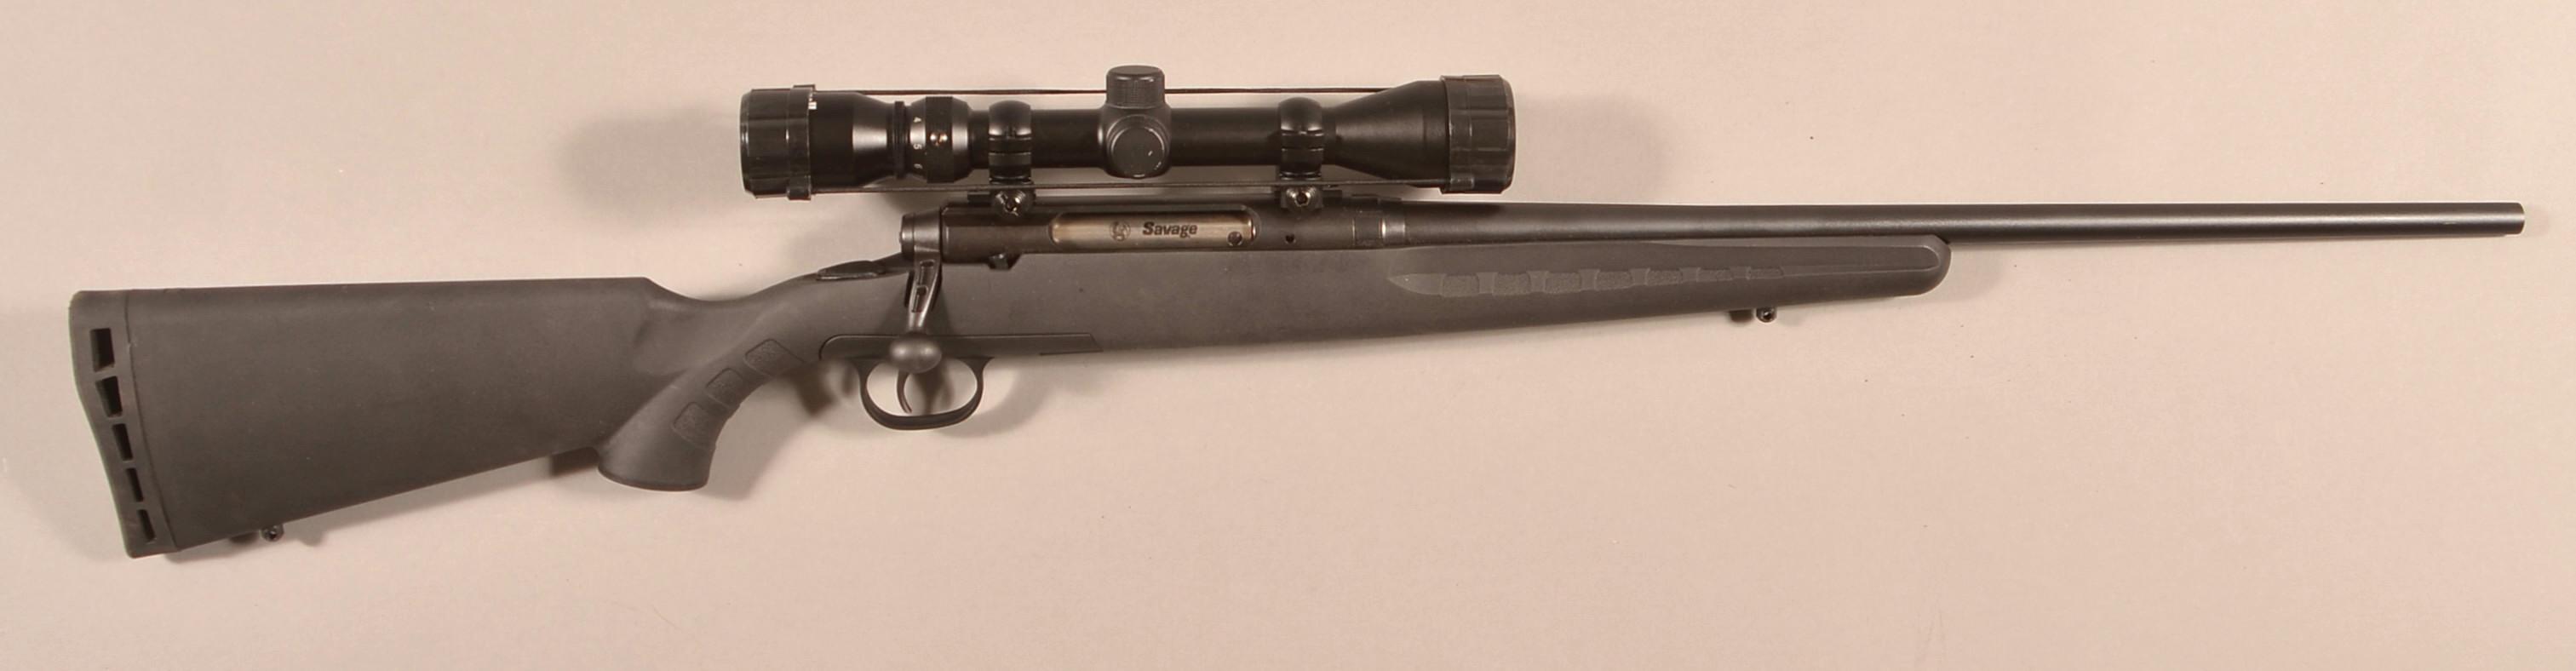 Savage Axis Model 30-06 bolt action rifle